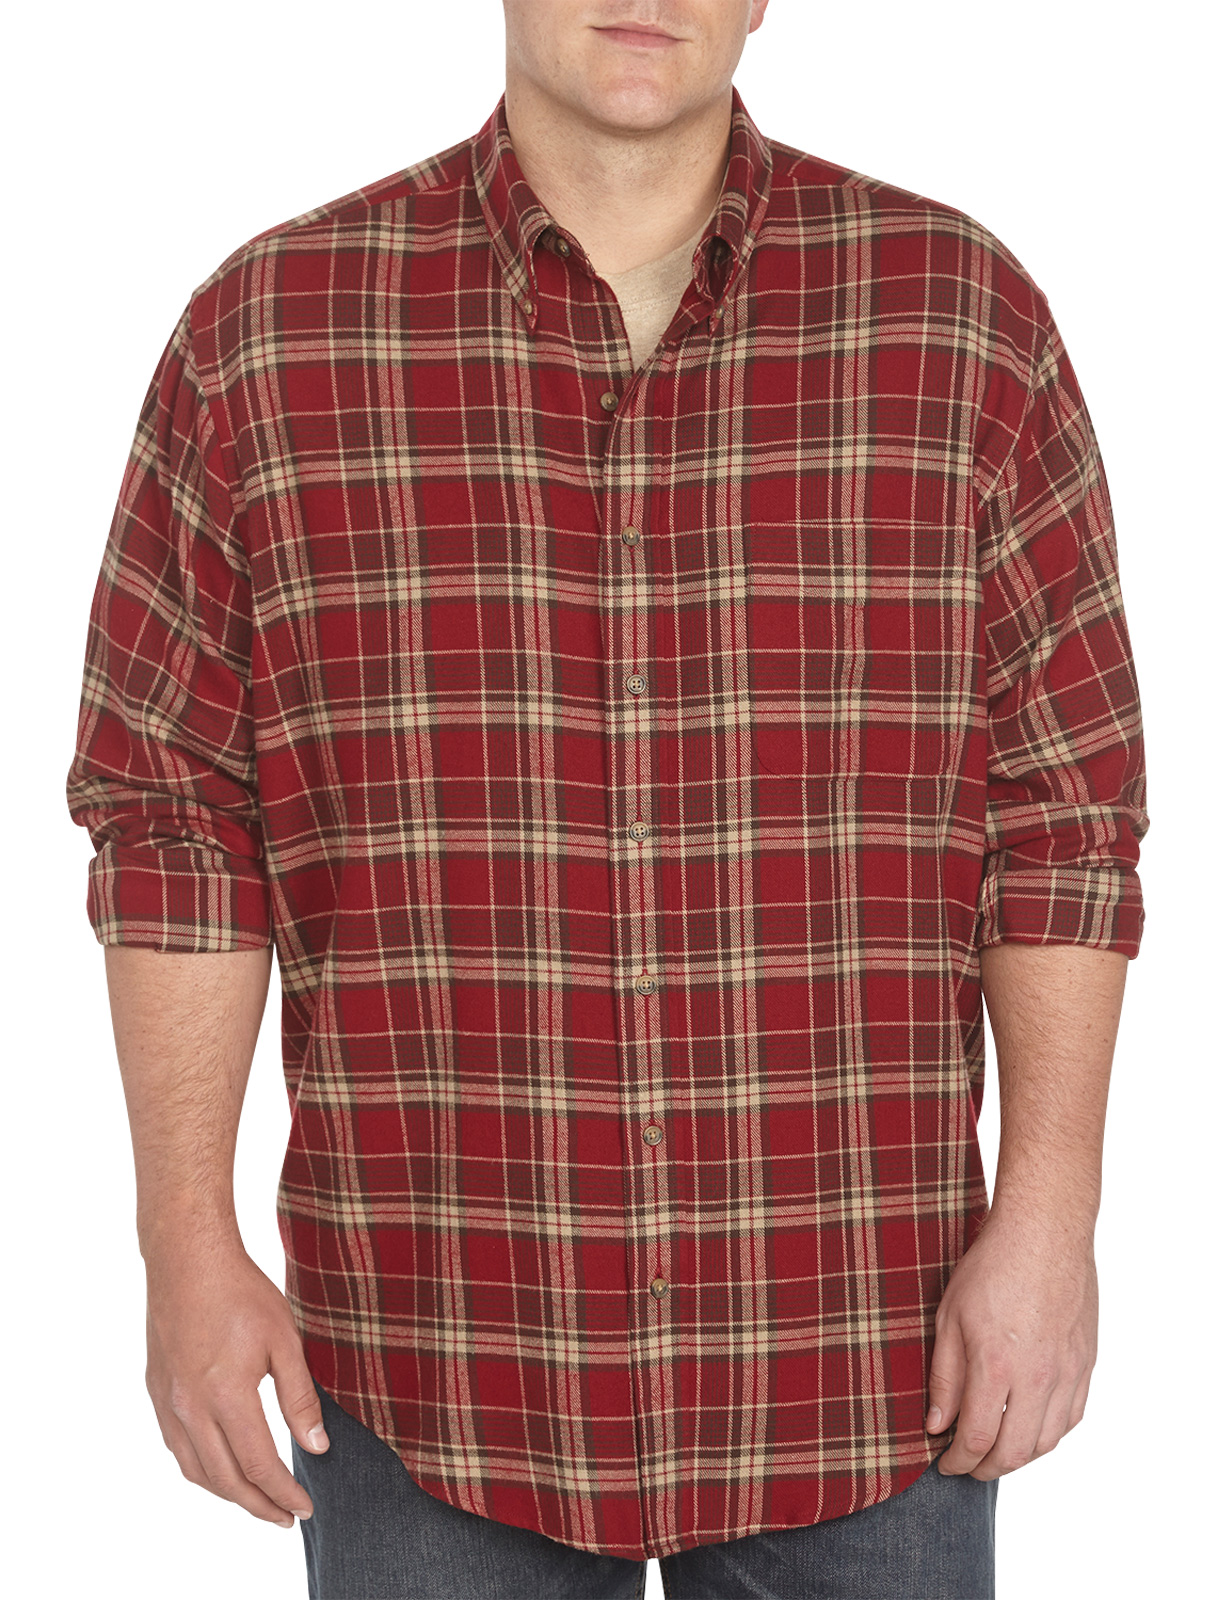 Harbor Bay Men's Big and Tall Plaid Flannel Shirt